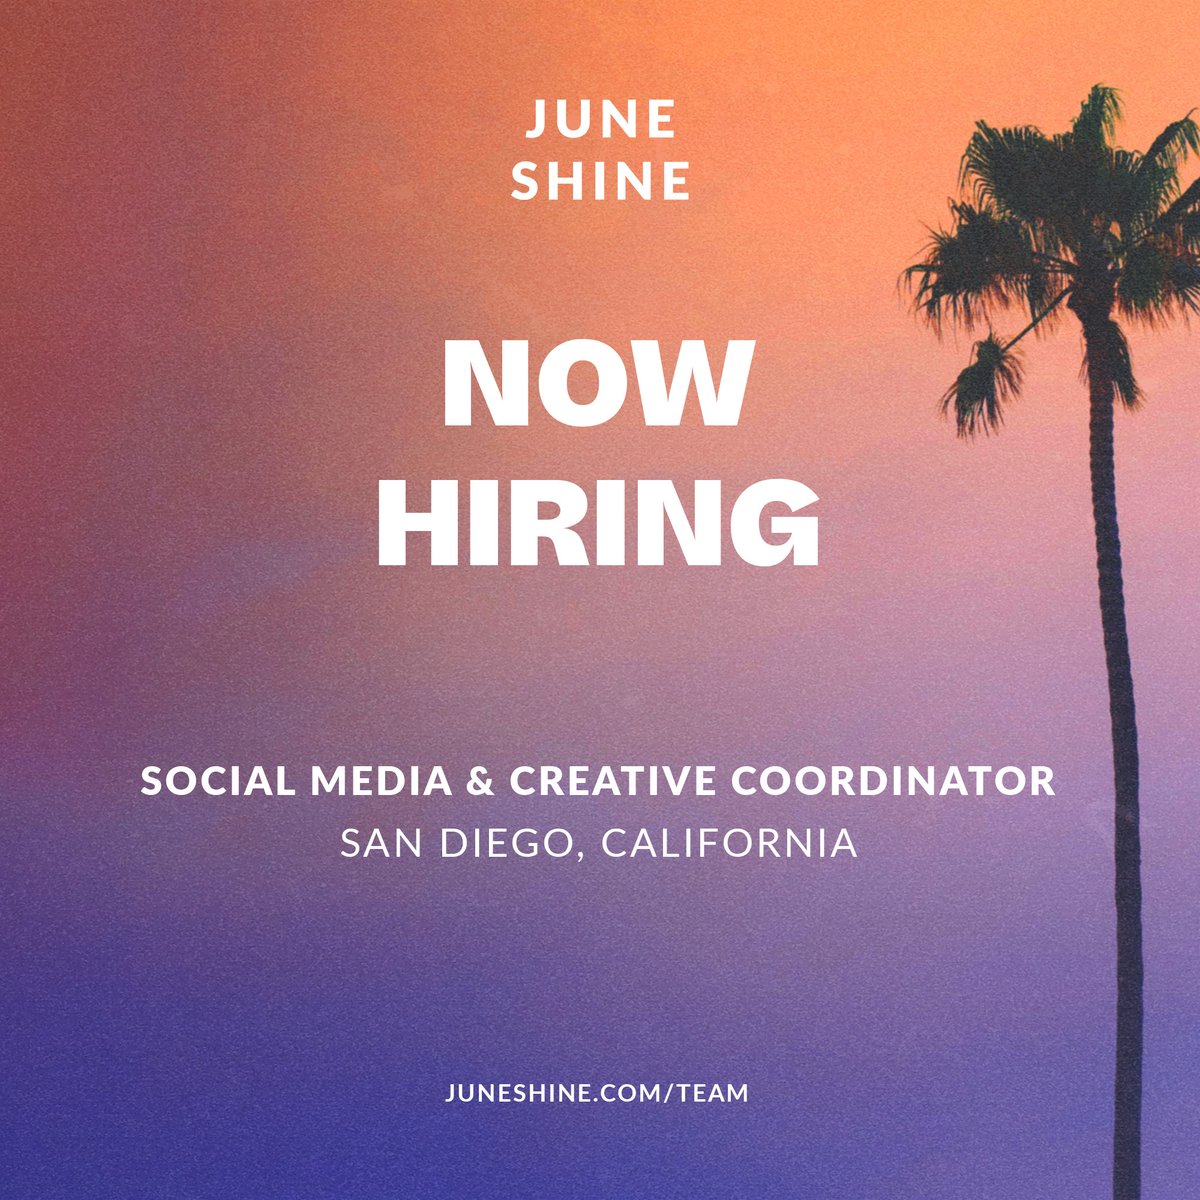 NOW HIRING 🤳 Social Media & Creative Coordinator, San Diego, CA. The Internet is a big place and we’re looking for someone to help us dish out deliciousness for the digital dance floor. Apply now @ juneshine.com/team #JuneShine